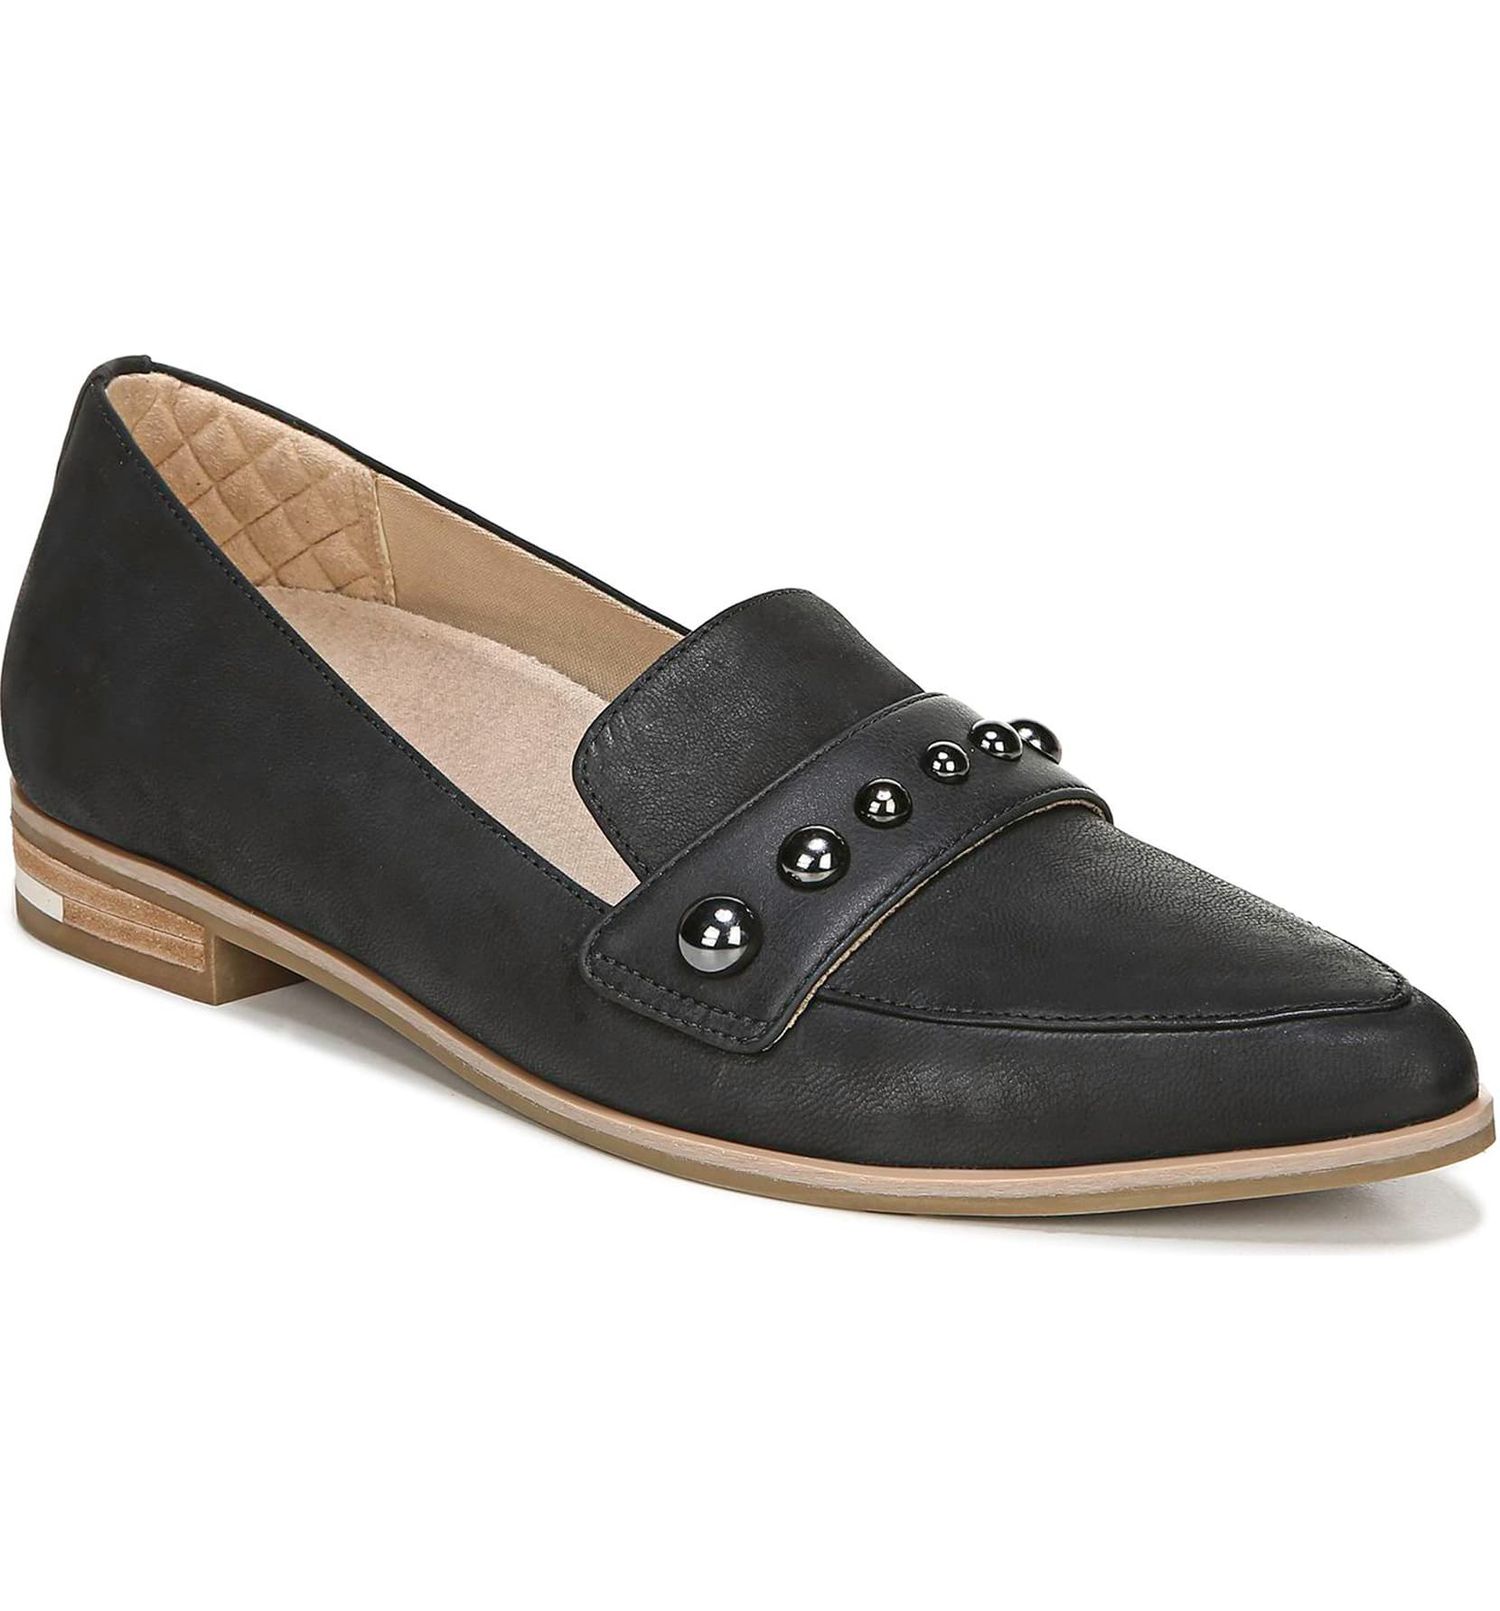 DR. SCHOLL'S Faxon Studded Loafer